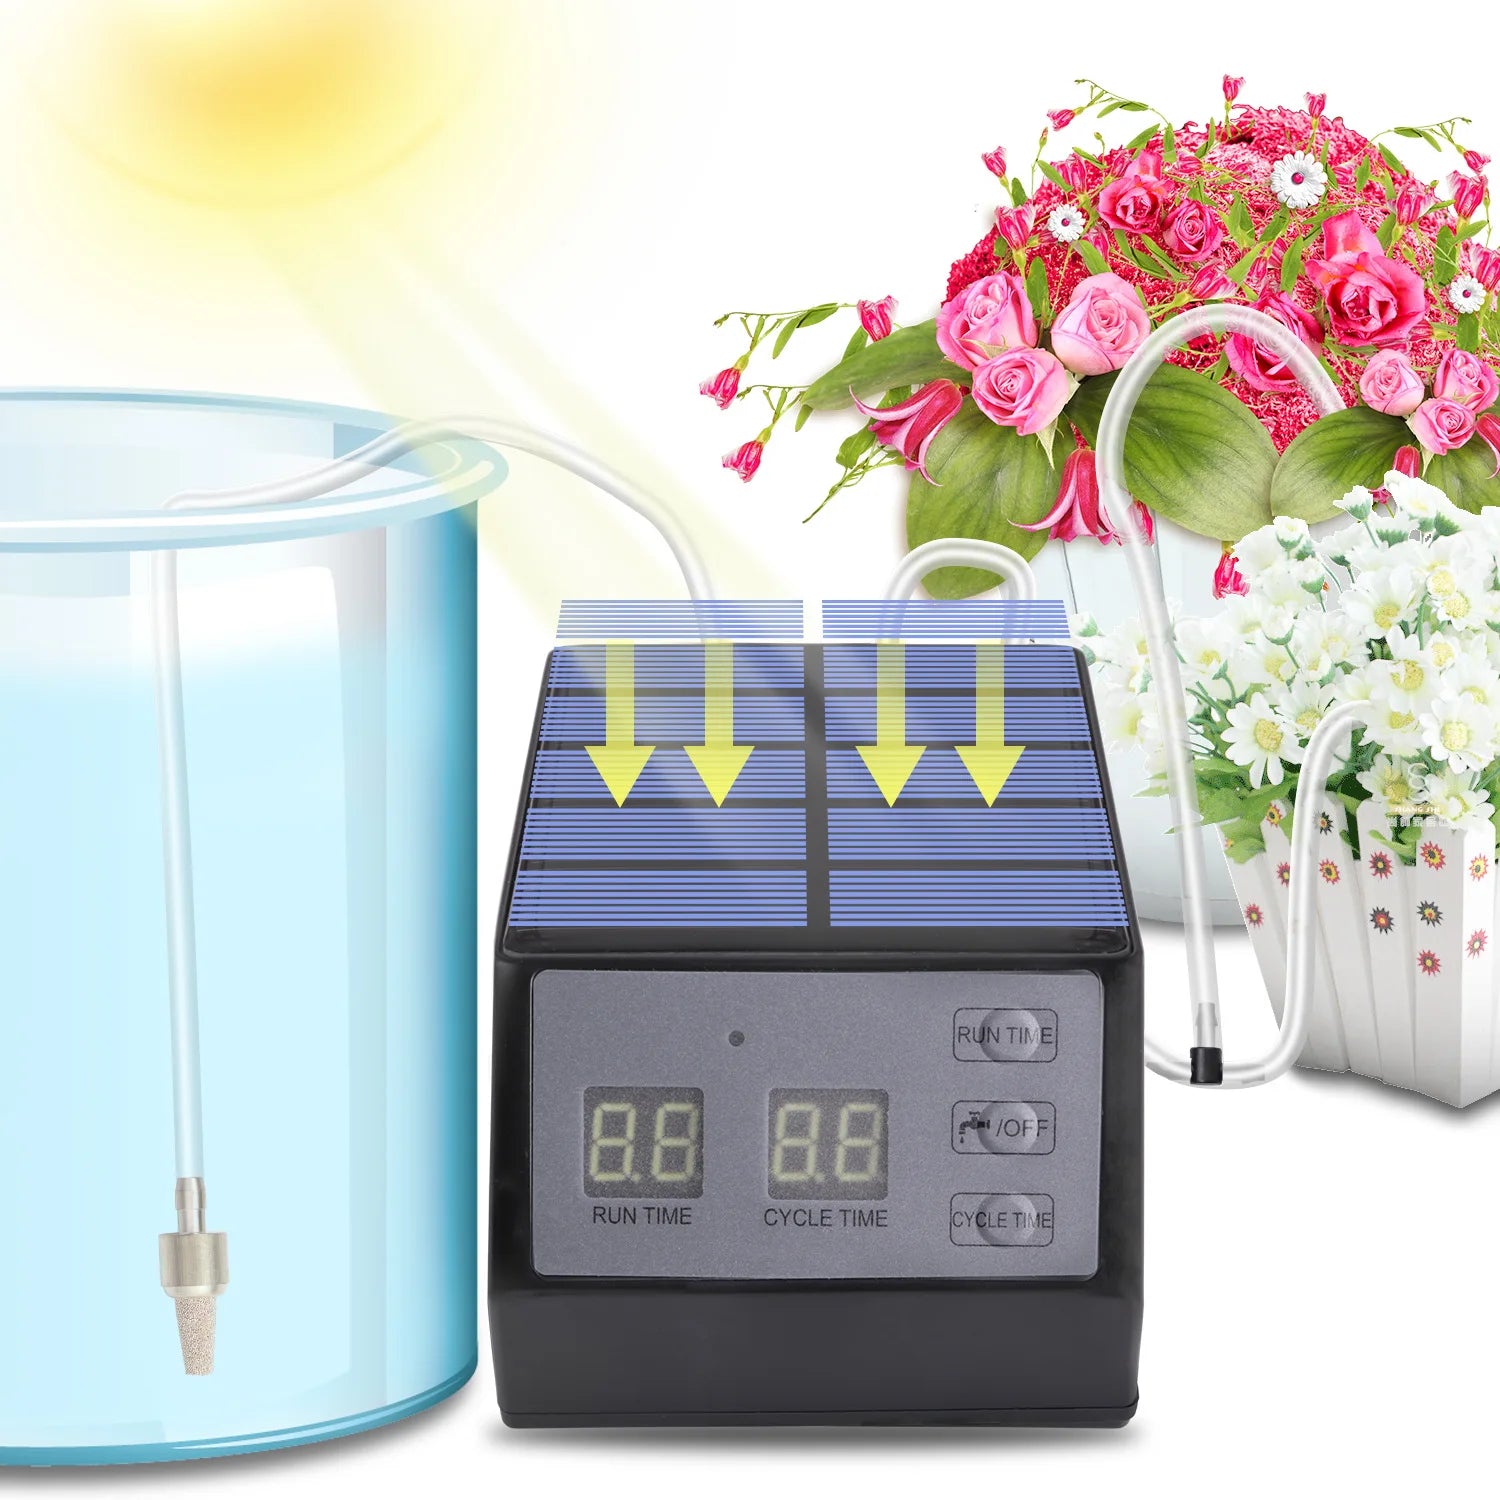 Solar Energy Intelligent Automatic Watering Device Timer System Garden Drip Irrigation Device